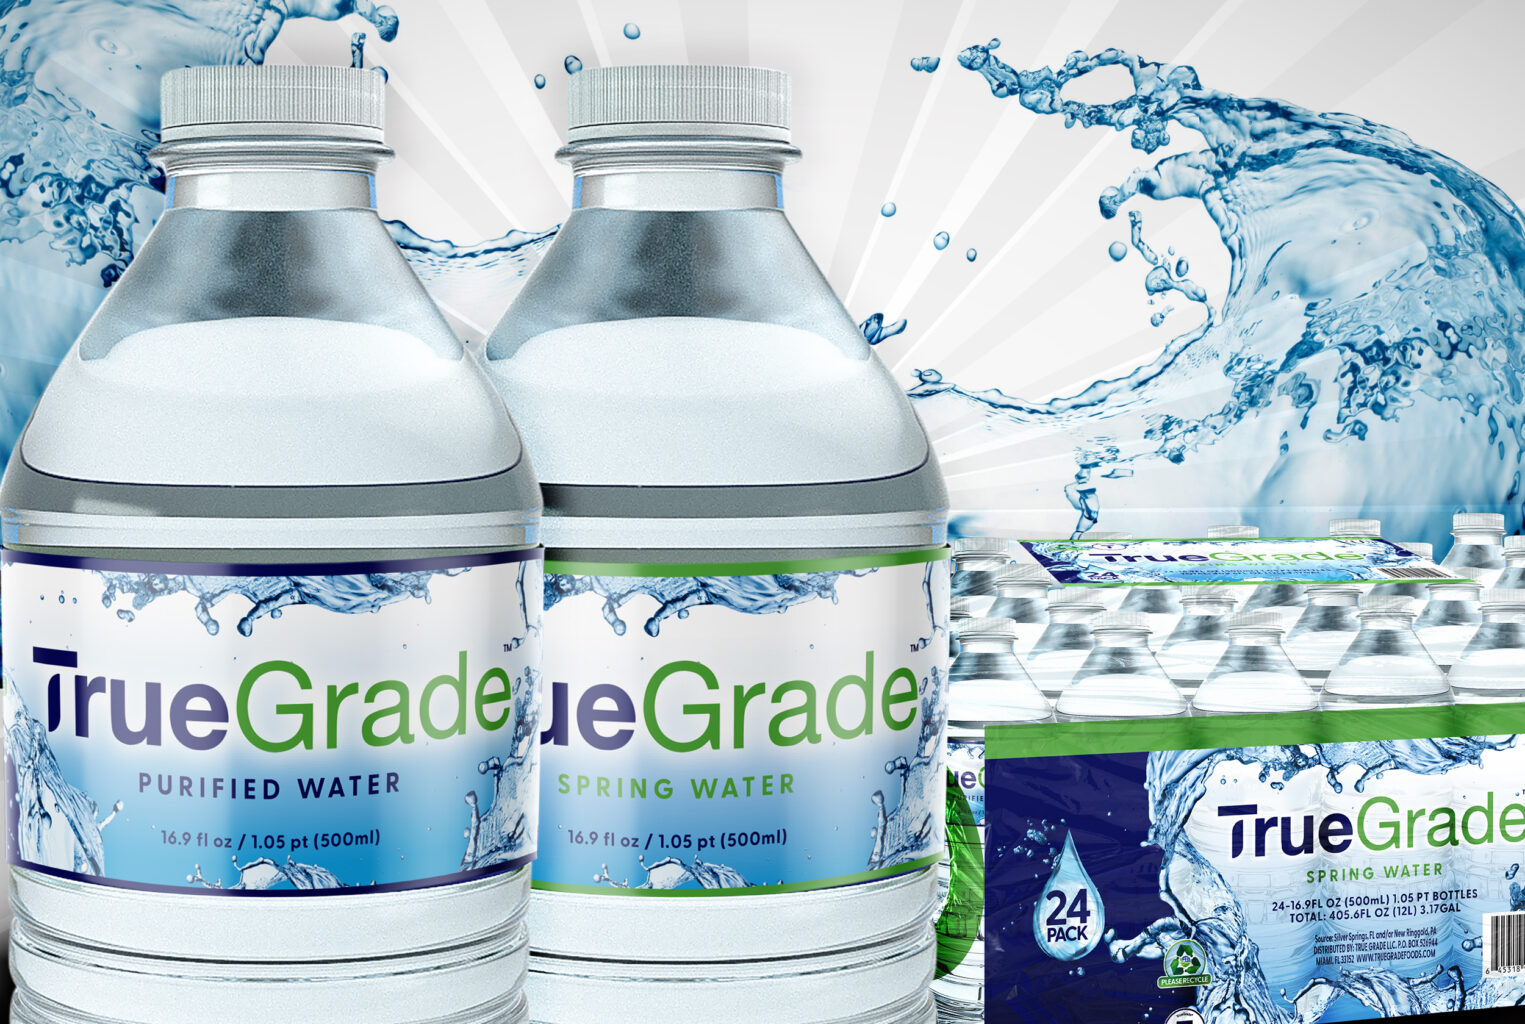 True Grade Water 16.9 fl oz and 24 pack images